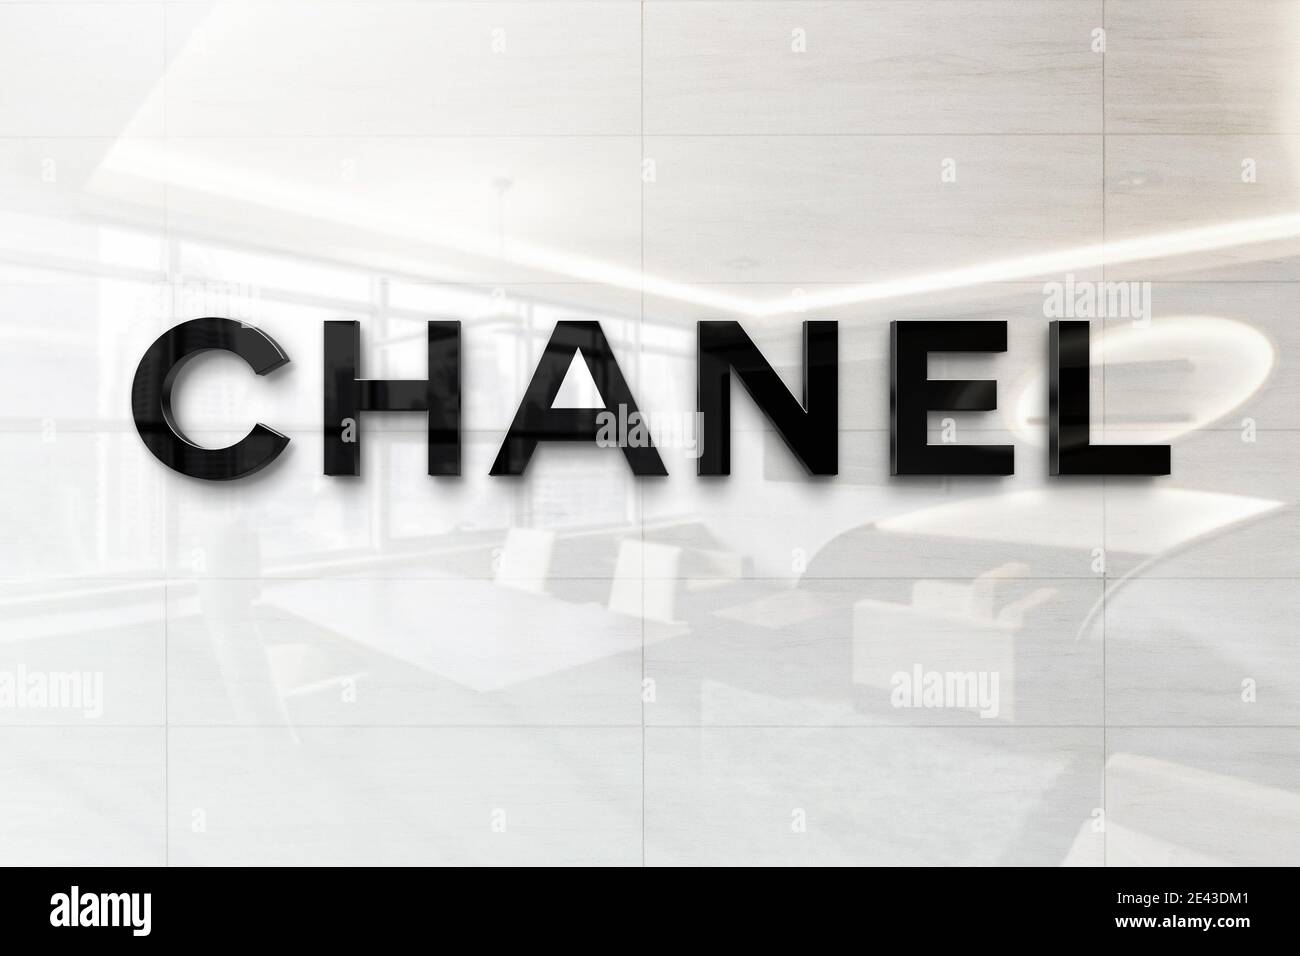 chanel logo on reflective business wall plaque Stock Photo